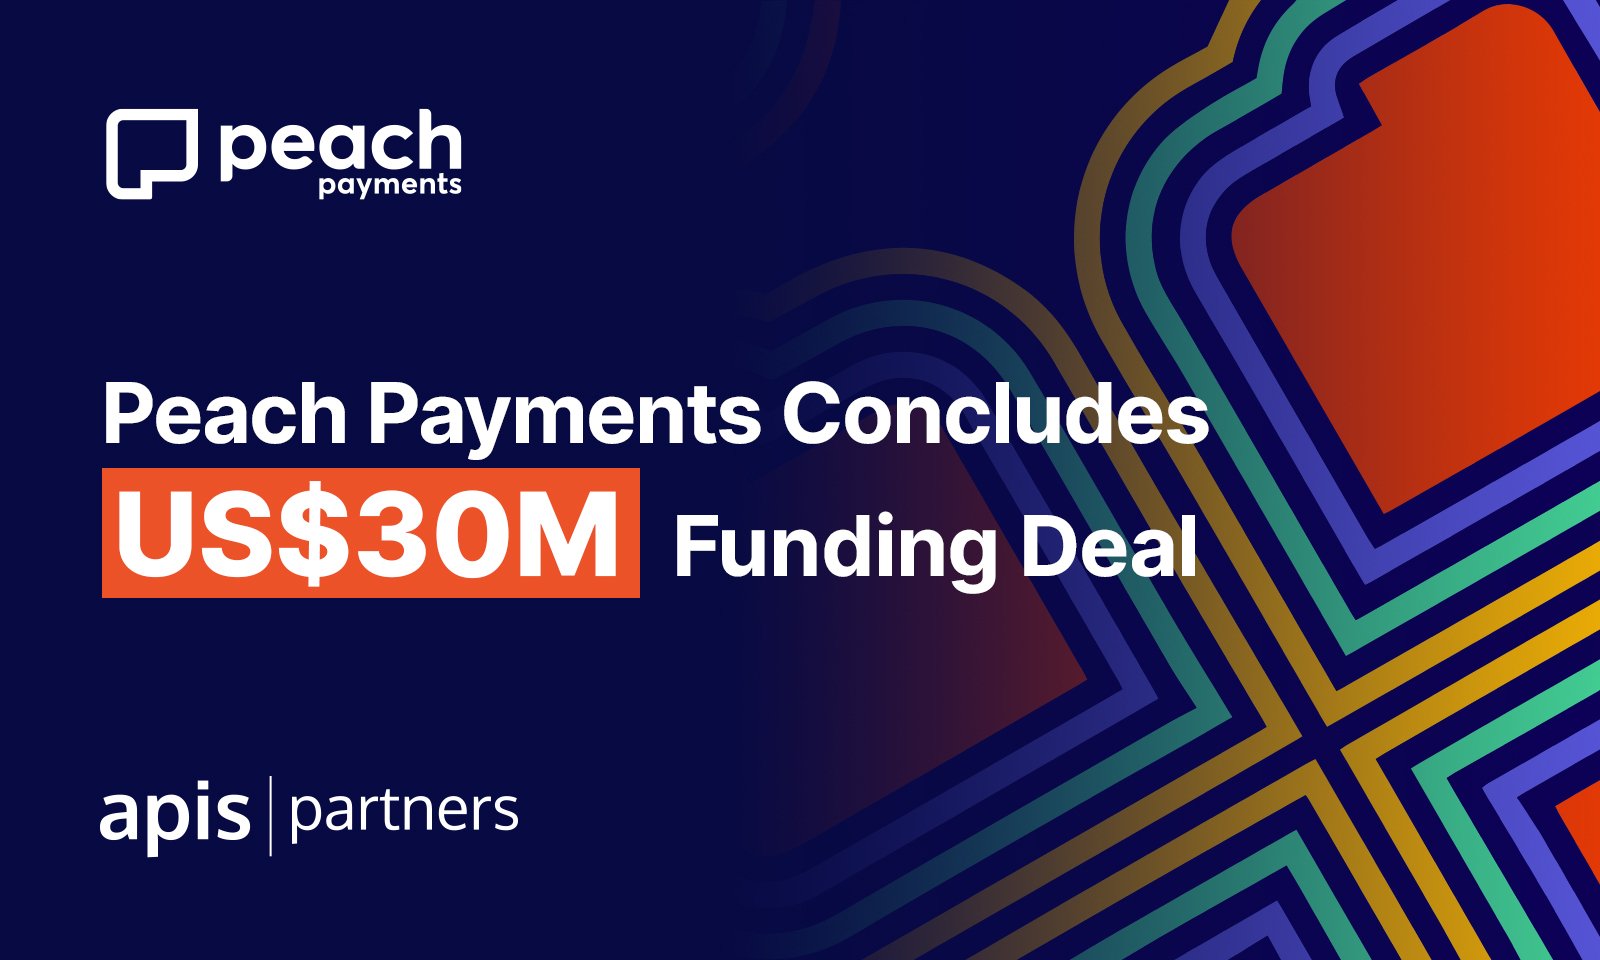 Peach Payments concludes US$30M funding deal.